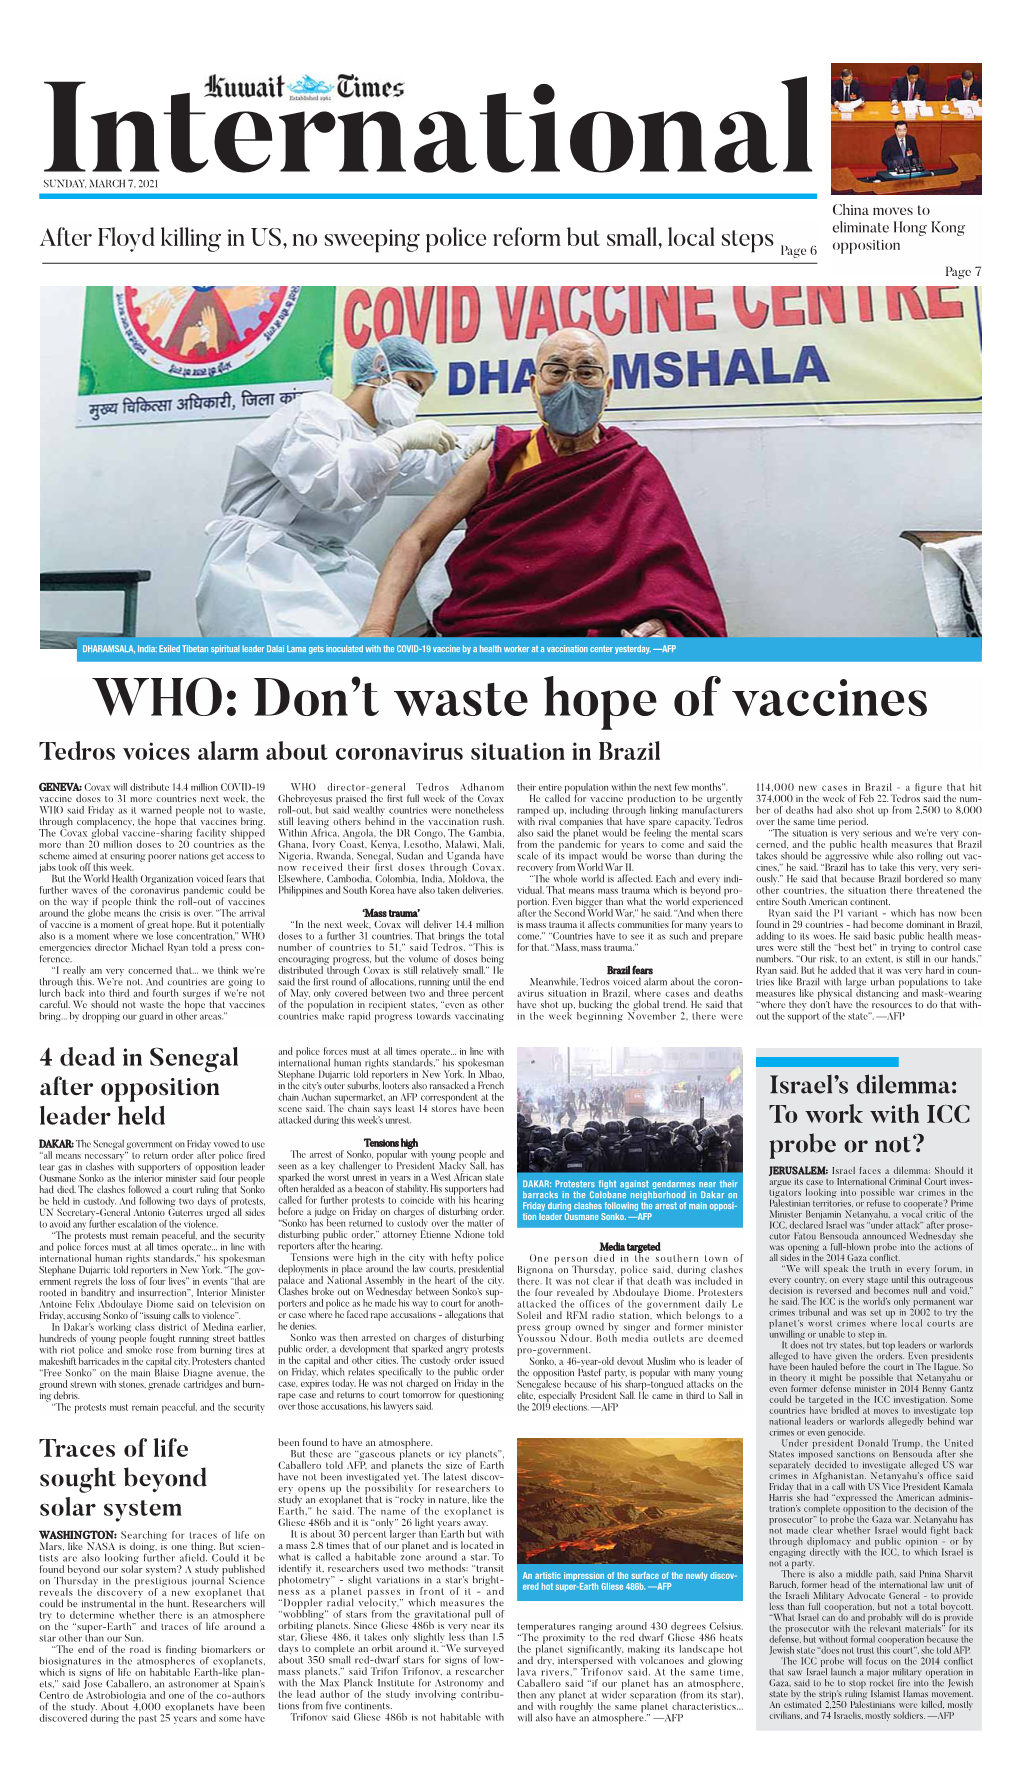 WHO: Don't Waste Hope of Vaccines